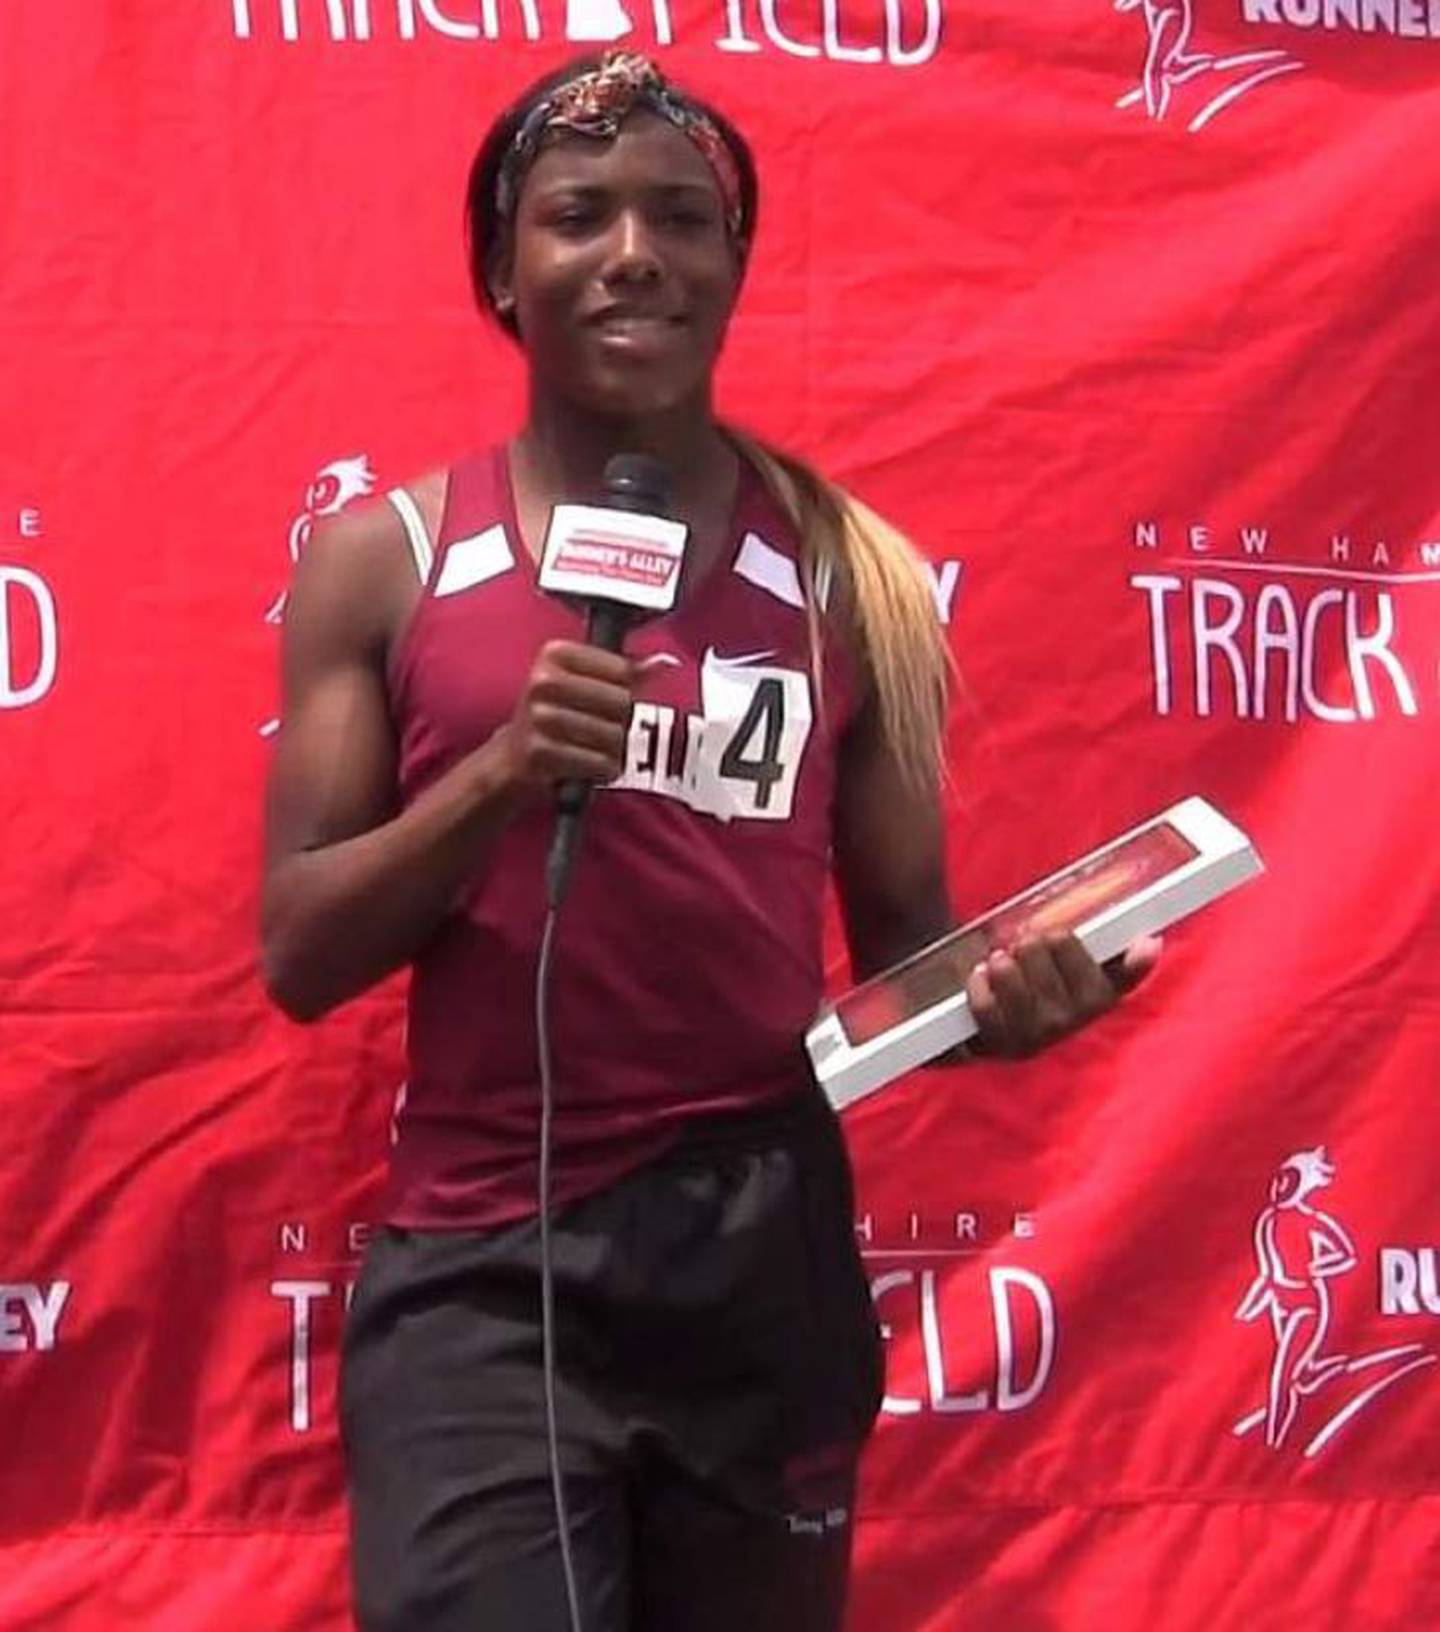 Transgender teen Terry Miller set new records when she came in first for the 100 and 200-meter dashes at the CIAC State Open track and field competition. Photo / NH Track & Field YouTube

